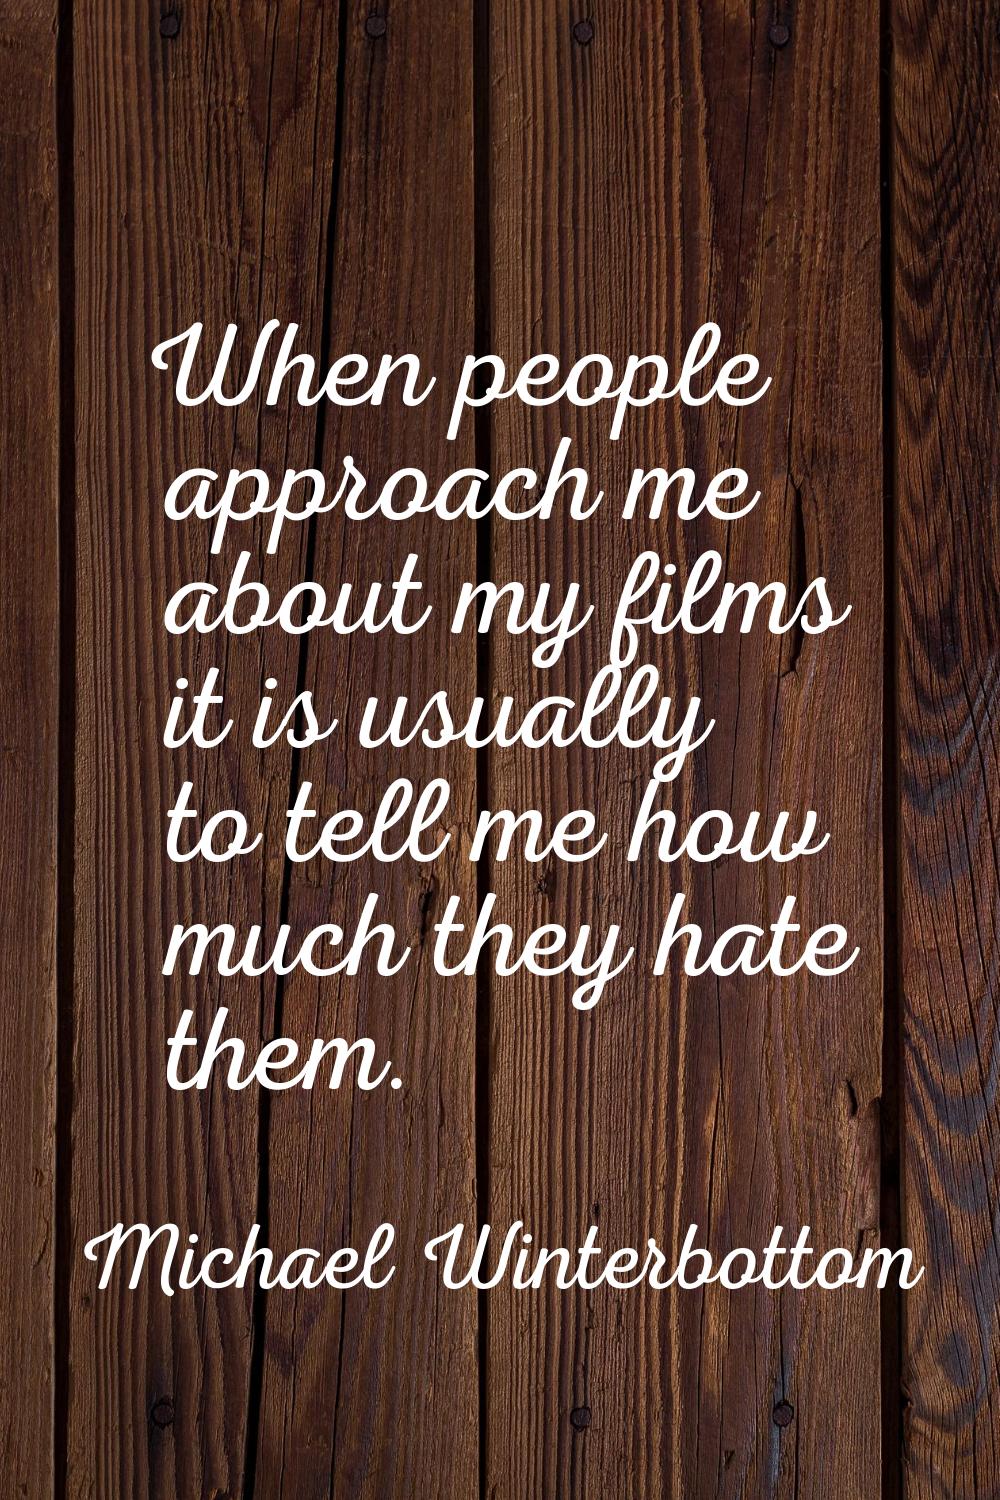 When people approach me about my films it is usually to tell me how much they hate them.